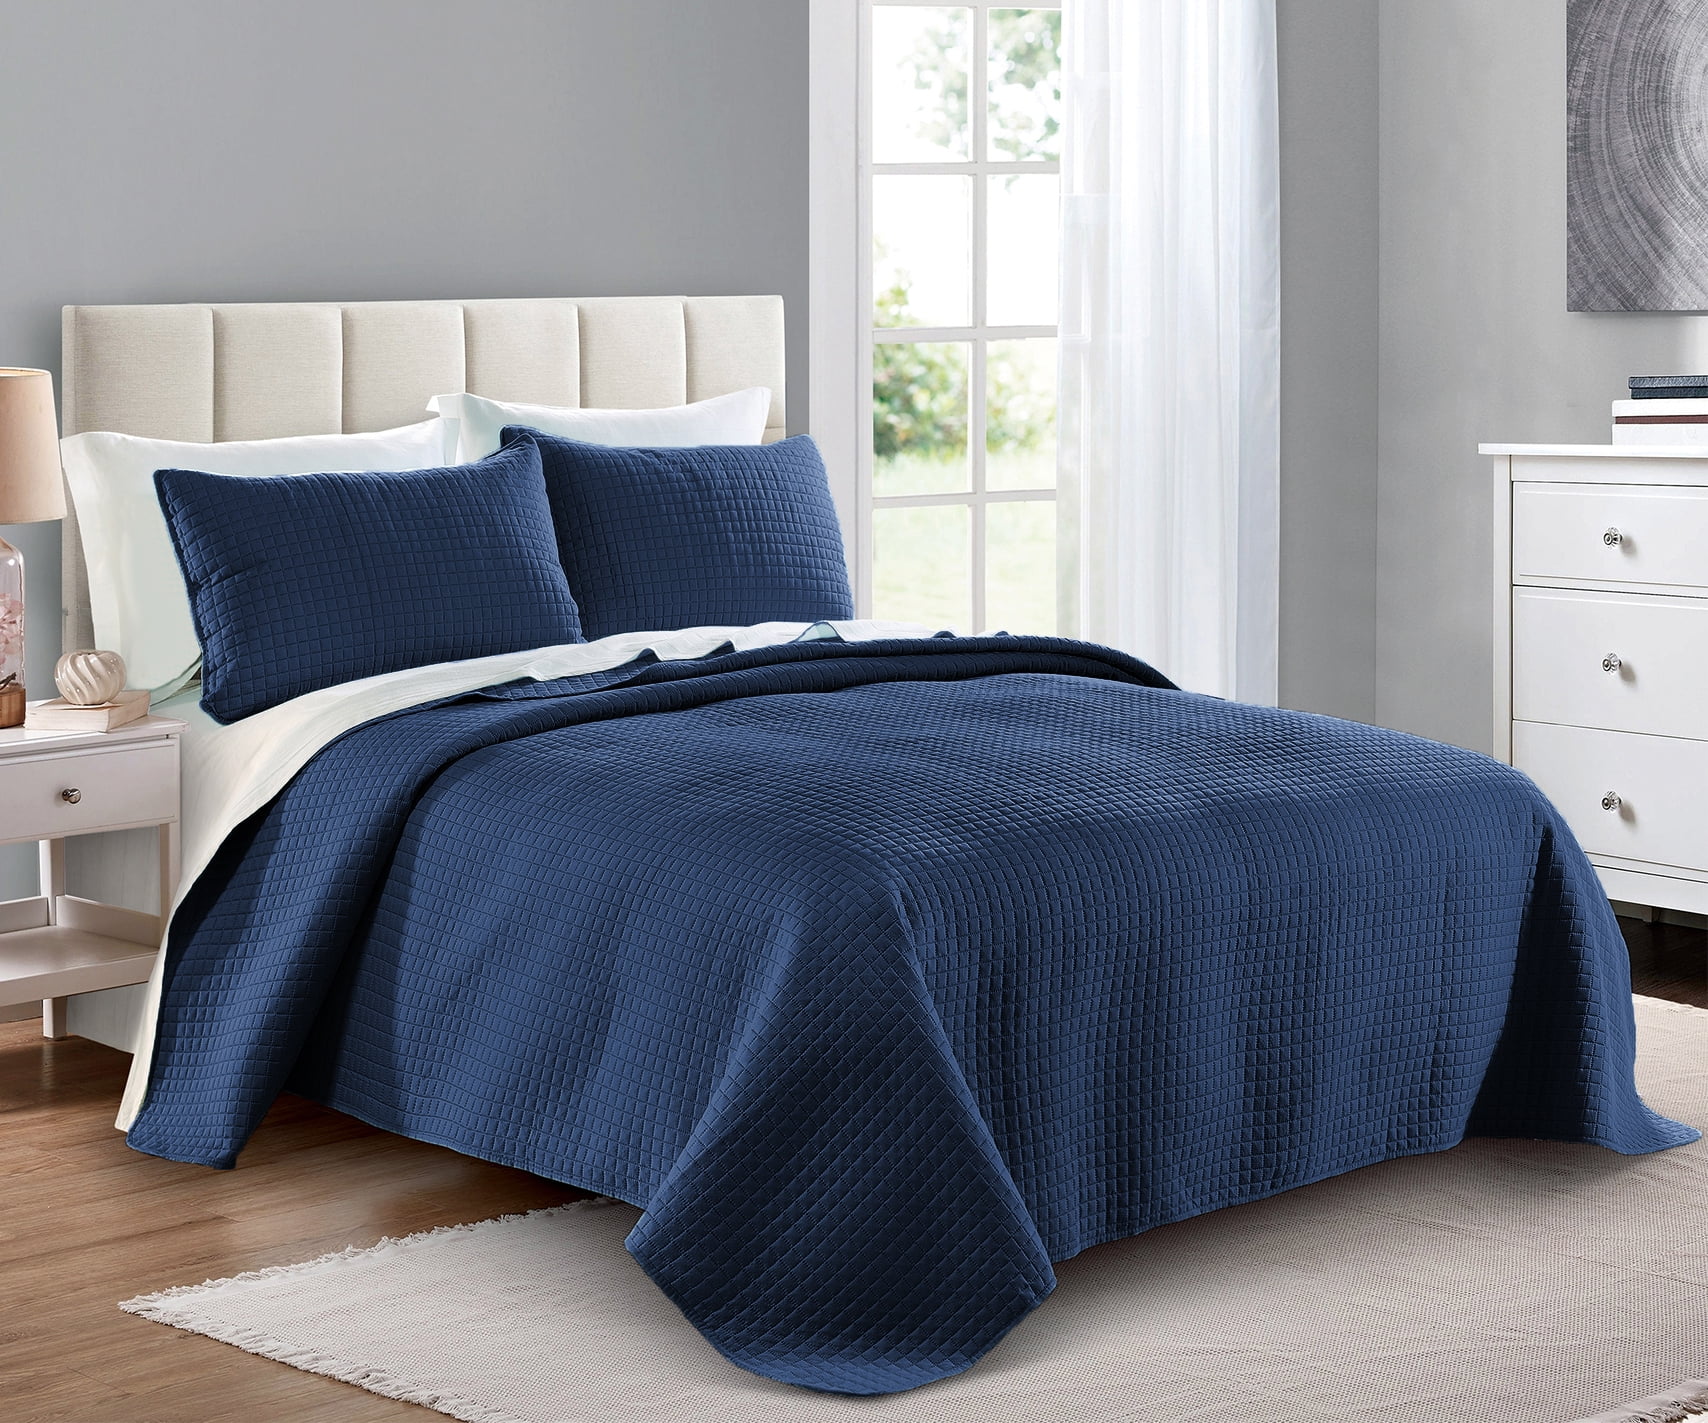 Quilt Set Full Queen Size Navy, Making A King Size Bedspread